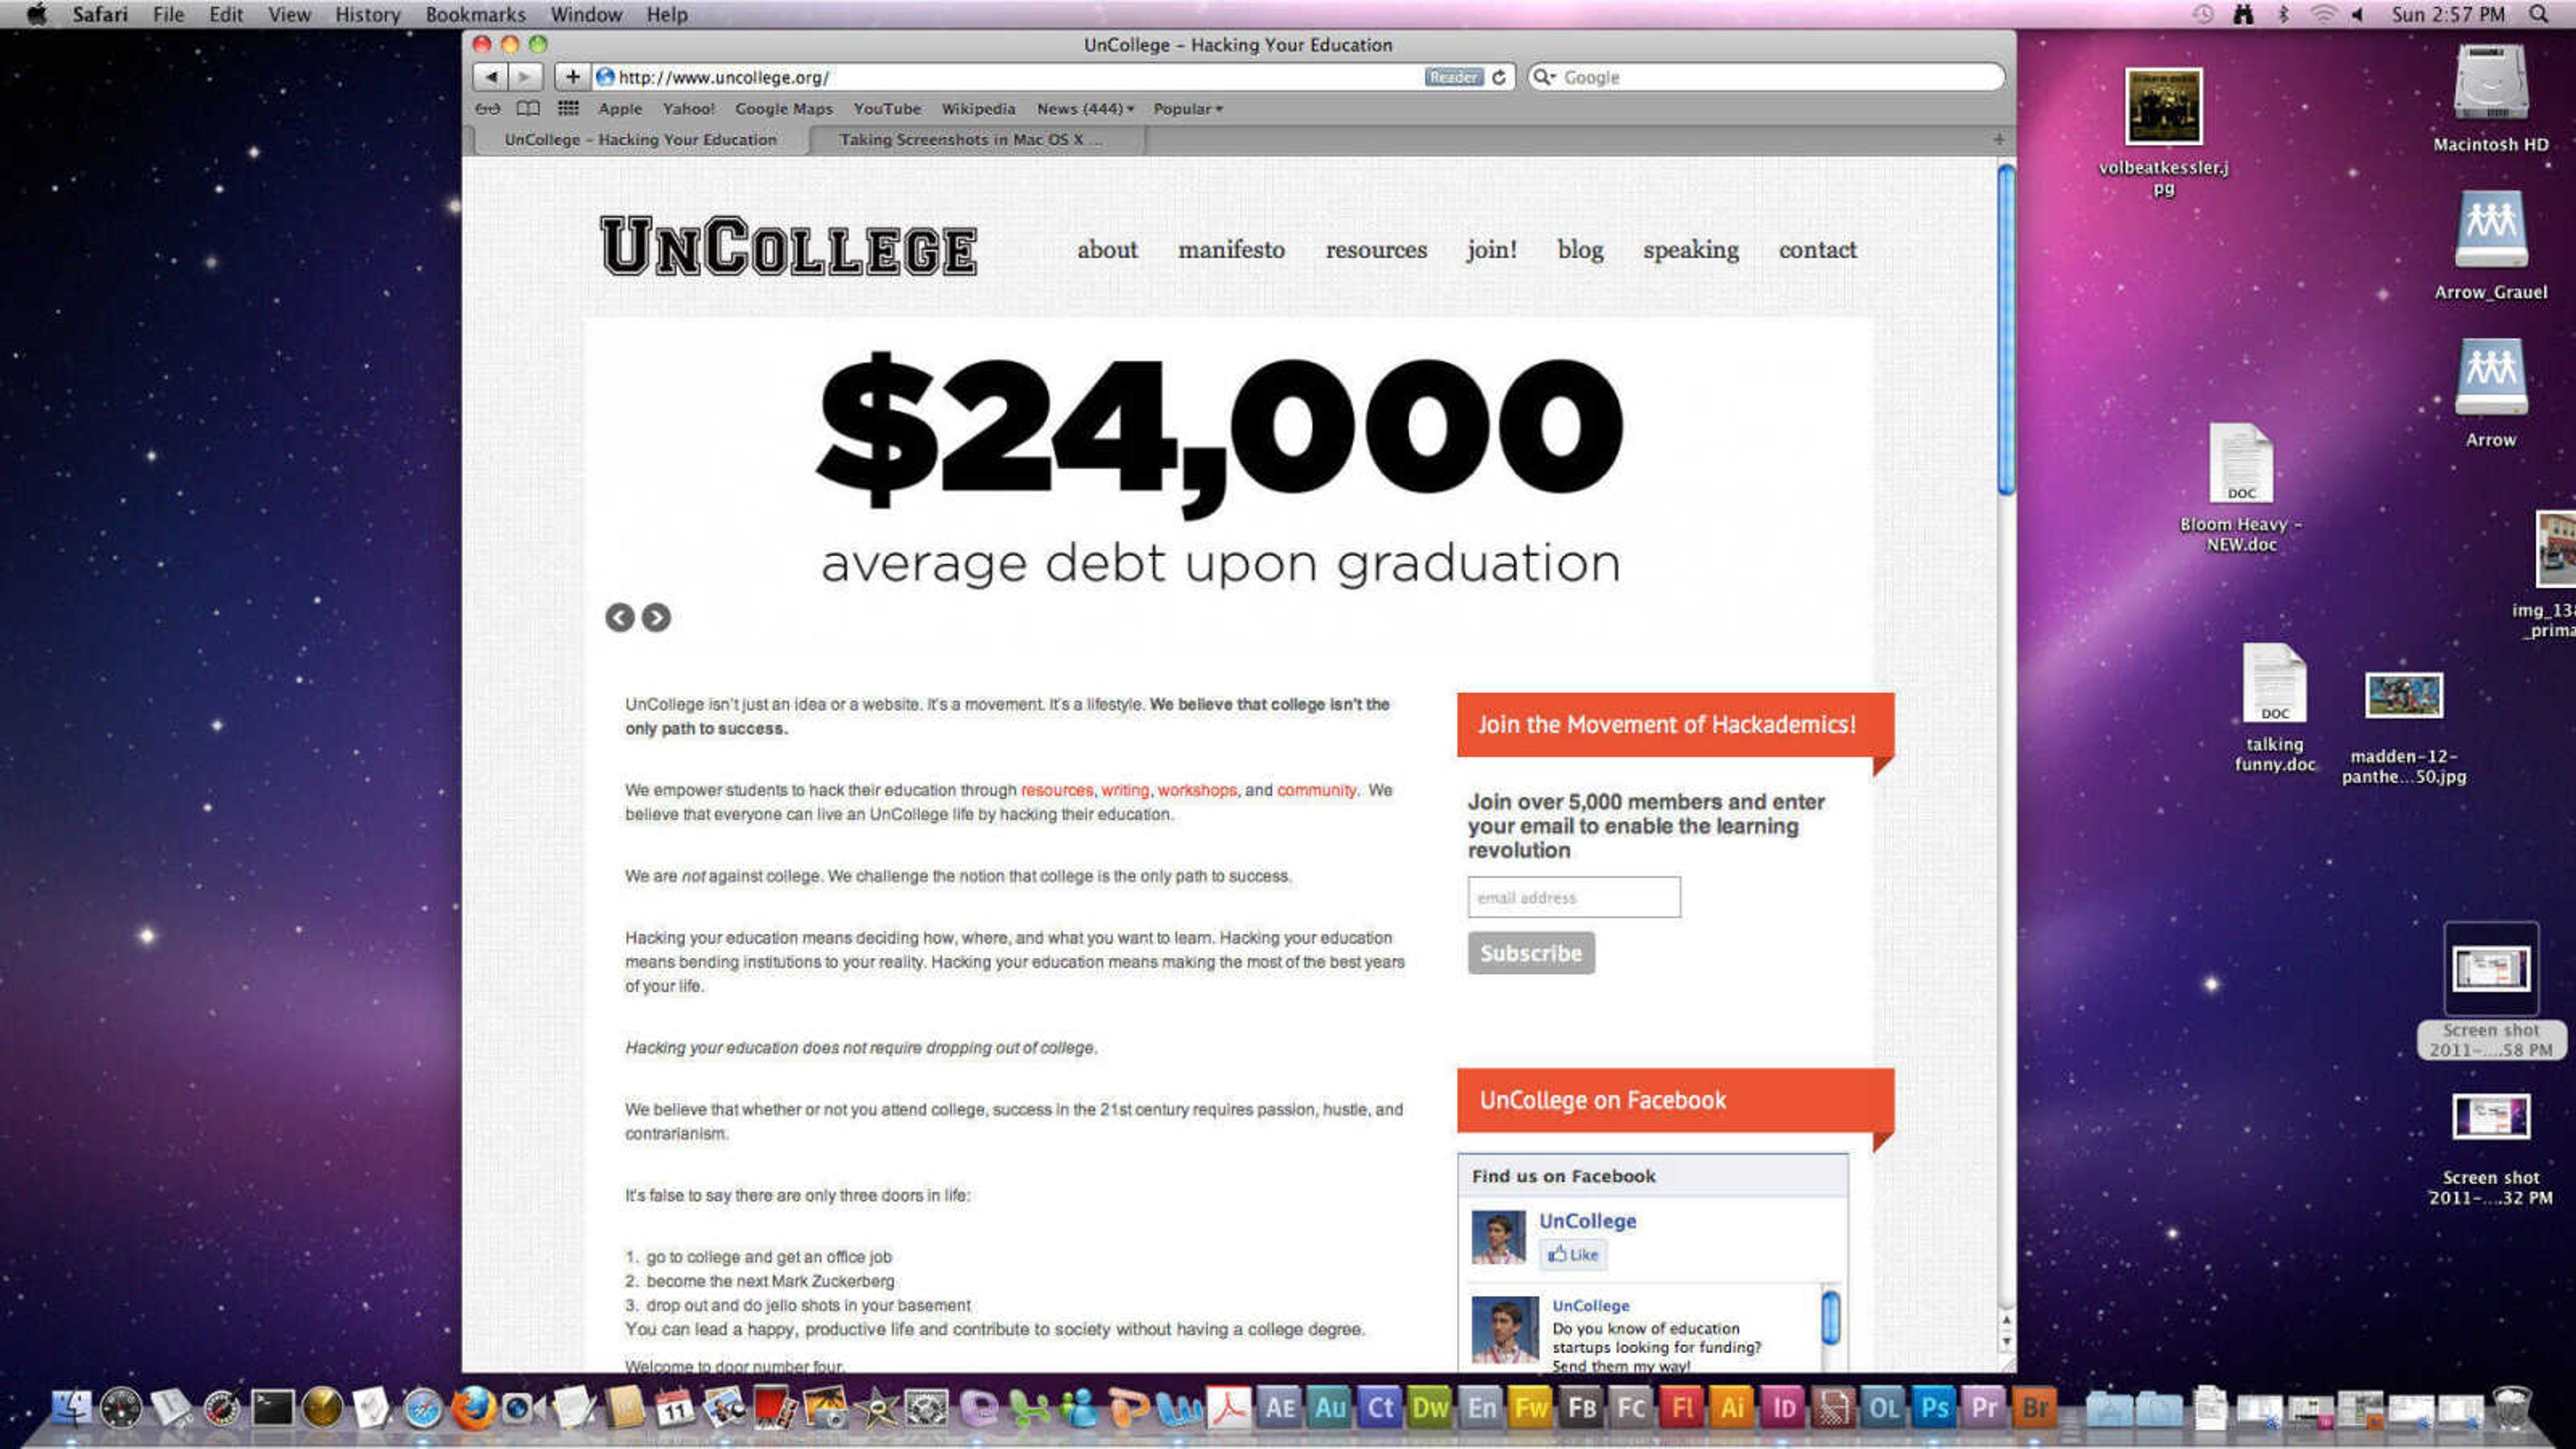 Uncolleged challenges the idea that college is the only path to success.